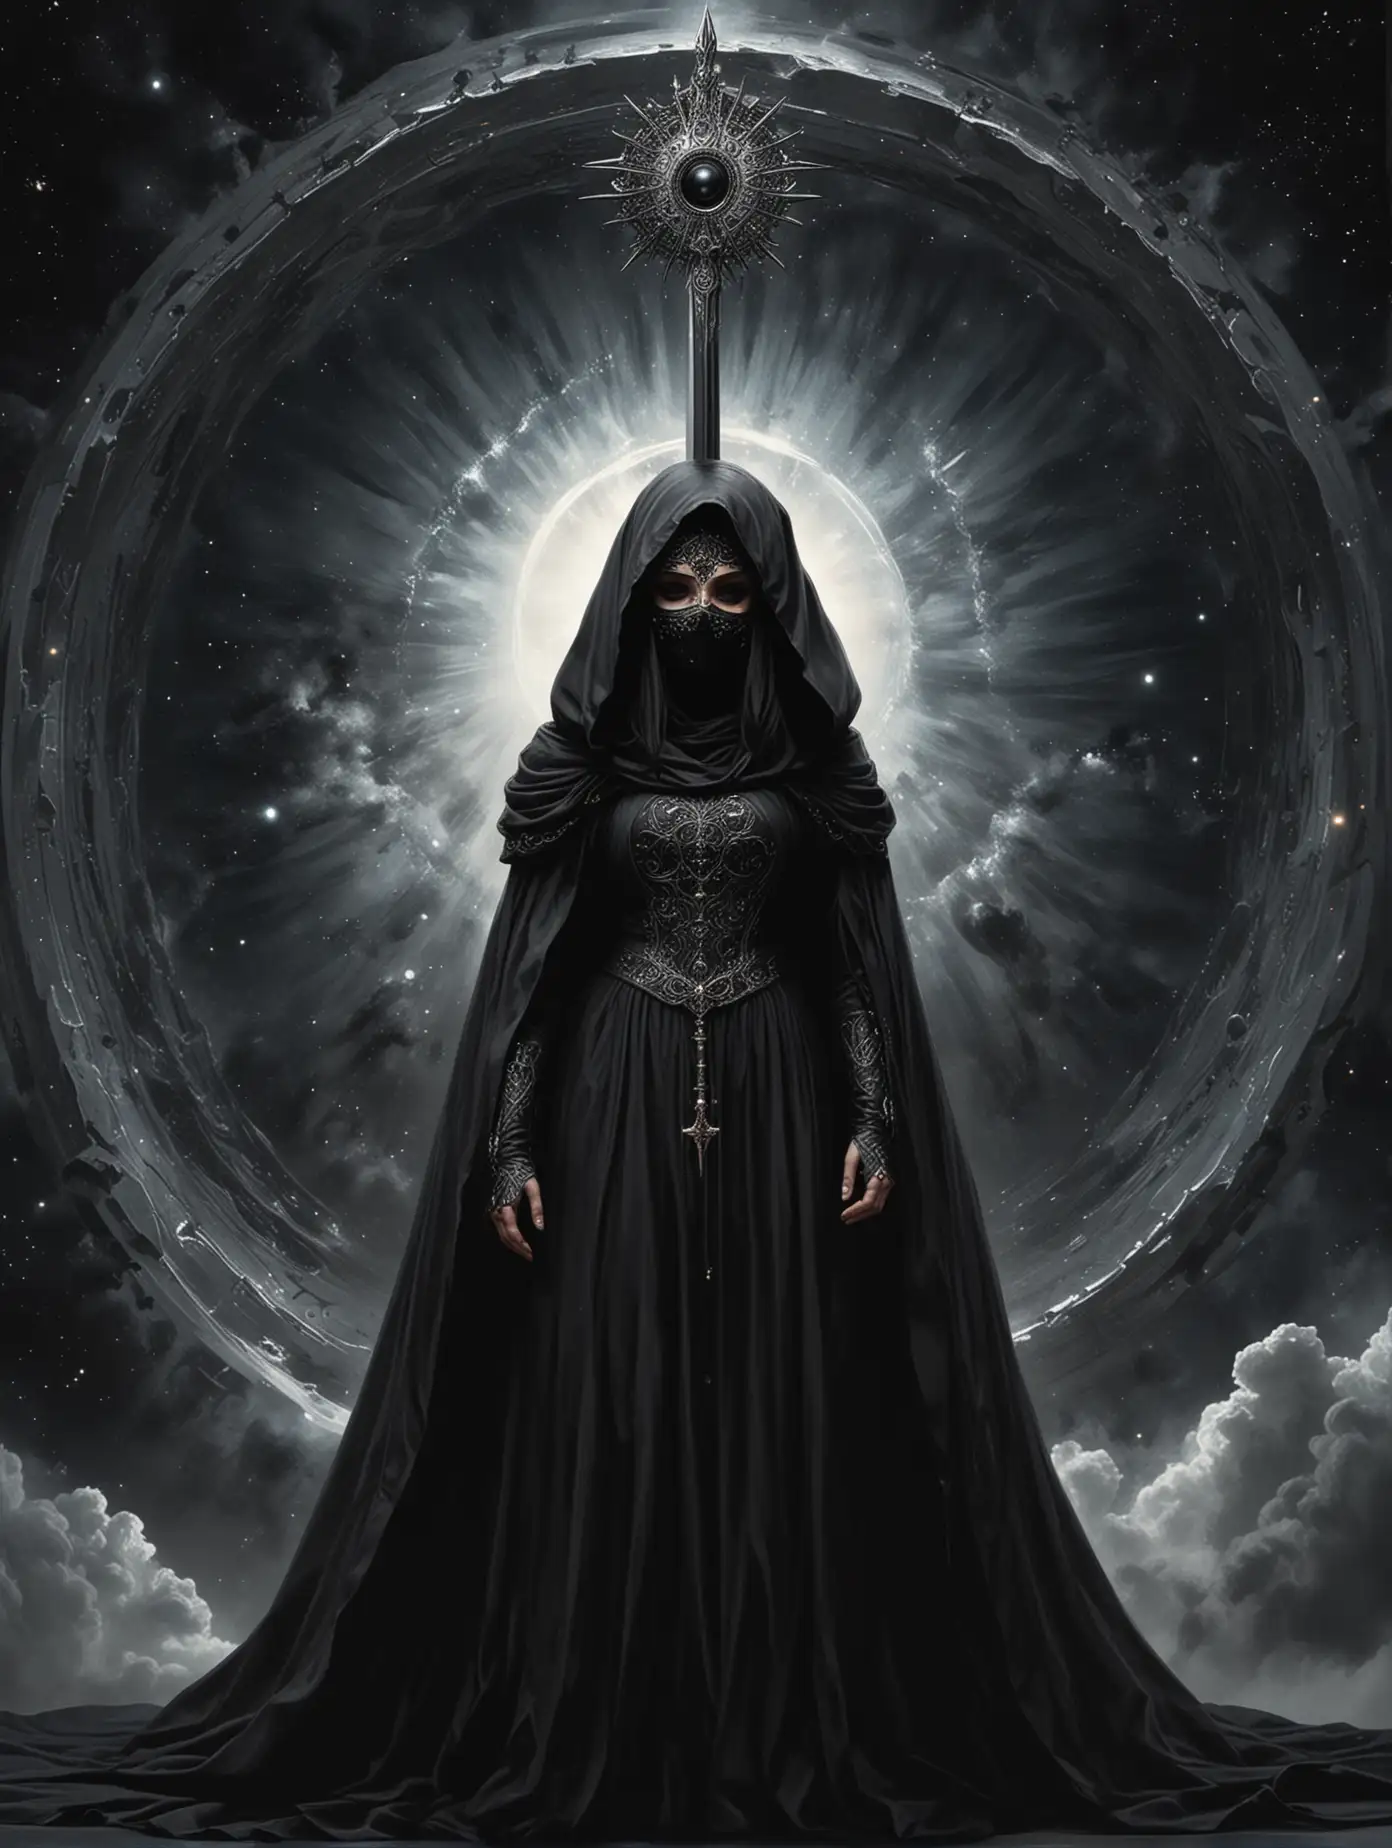 Sister-Hesperit-Confronts-the-Abyss-Enigmatic-Figure-Before-a-Cosmic-Vortex